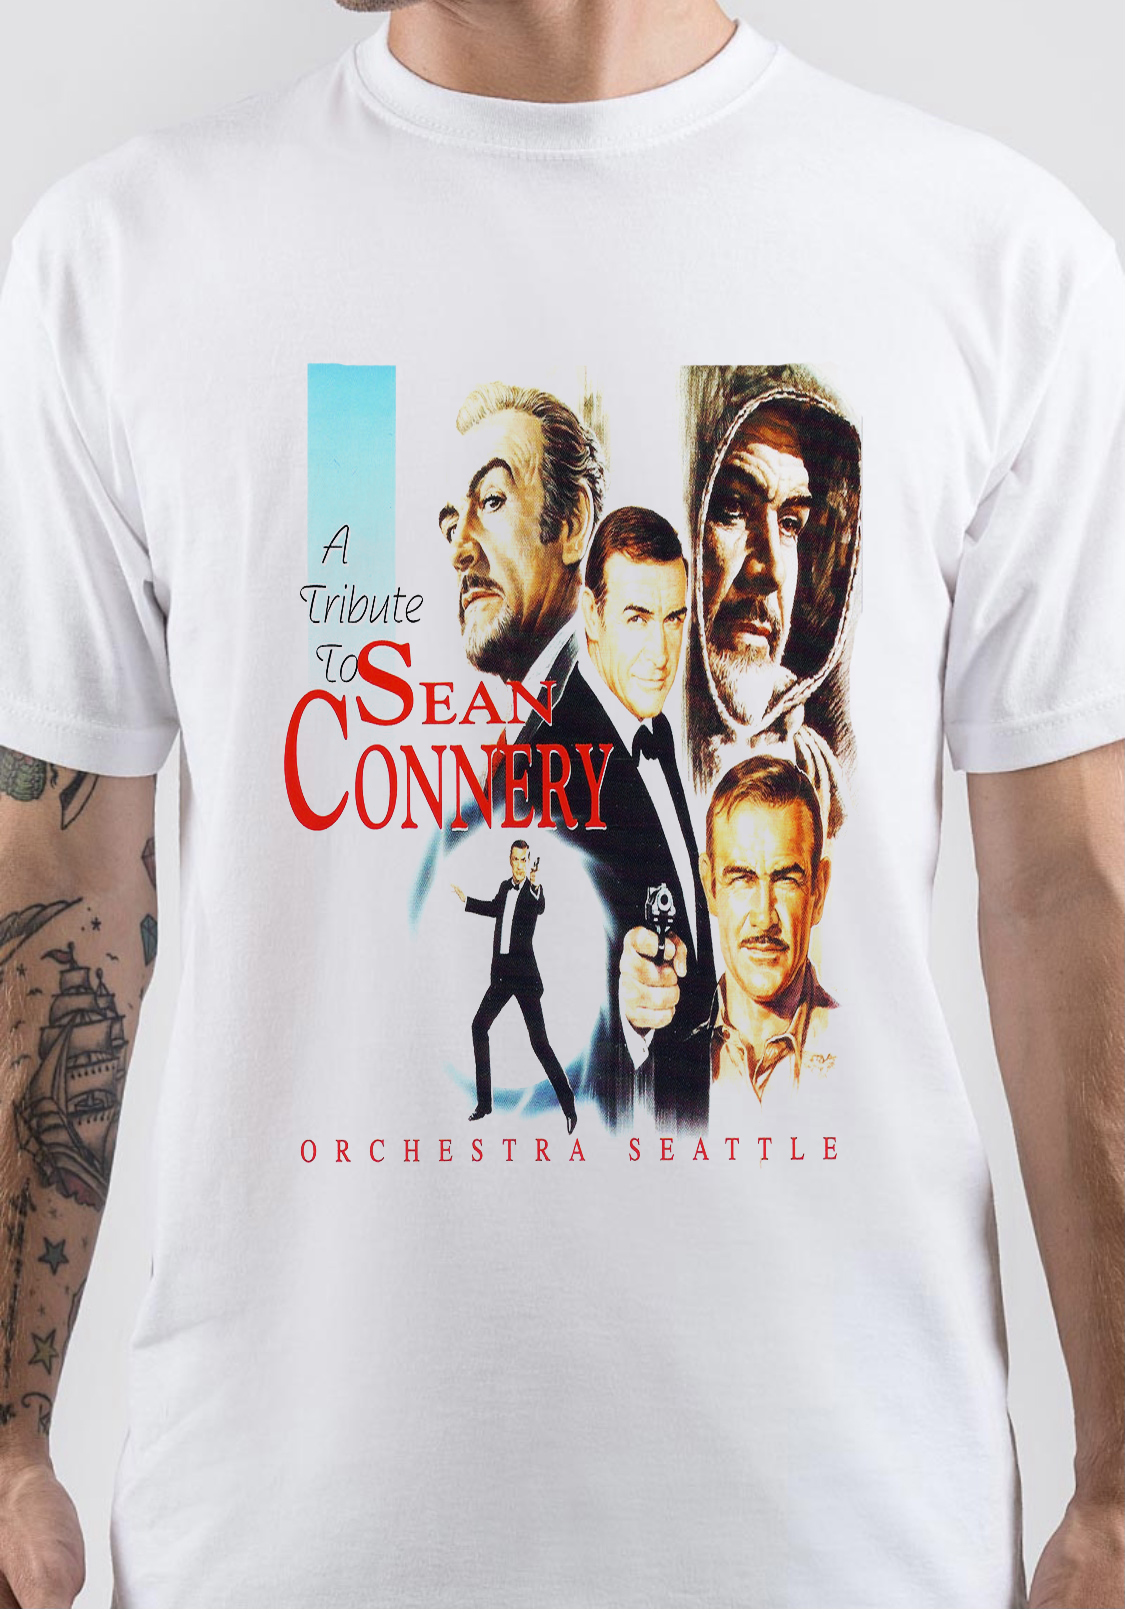 Sean Connery T-Shirt And Merchandise